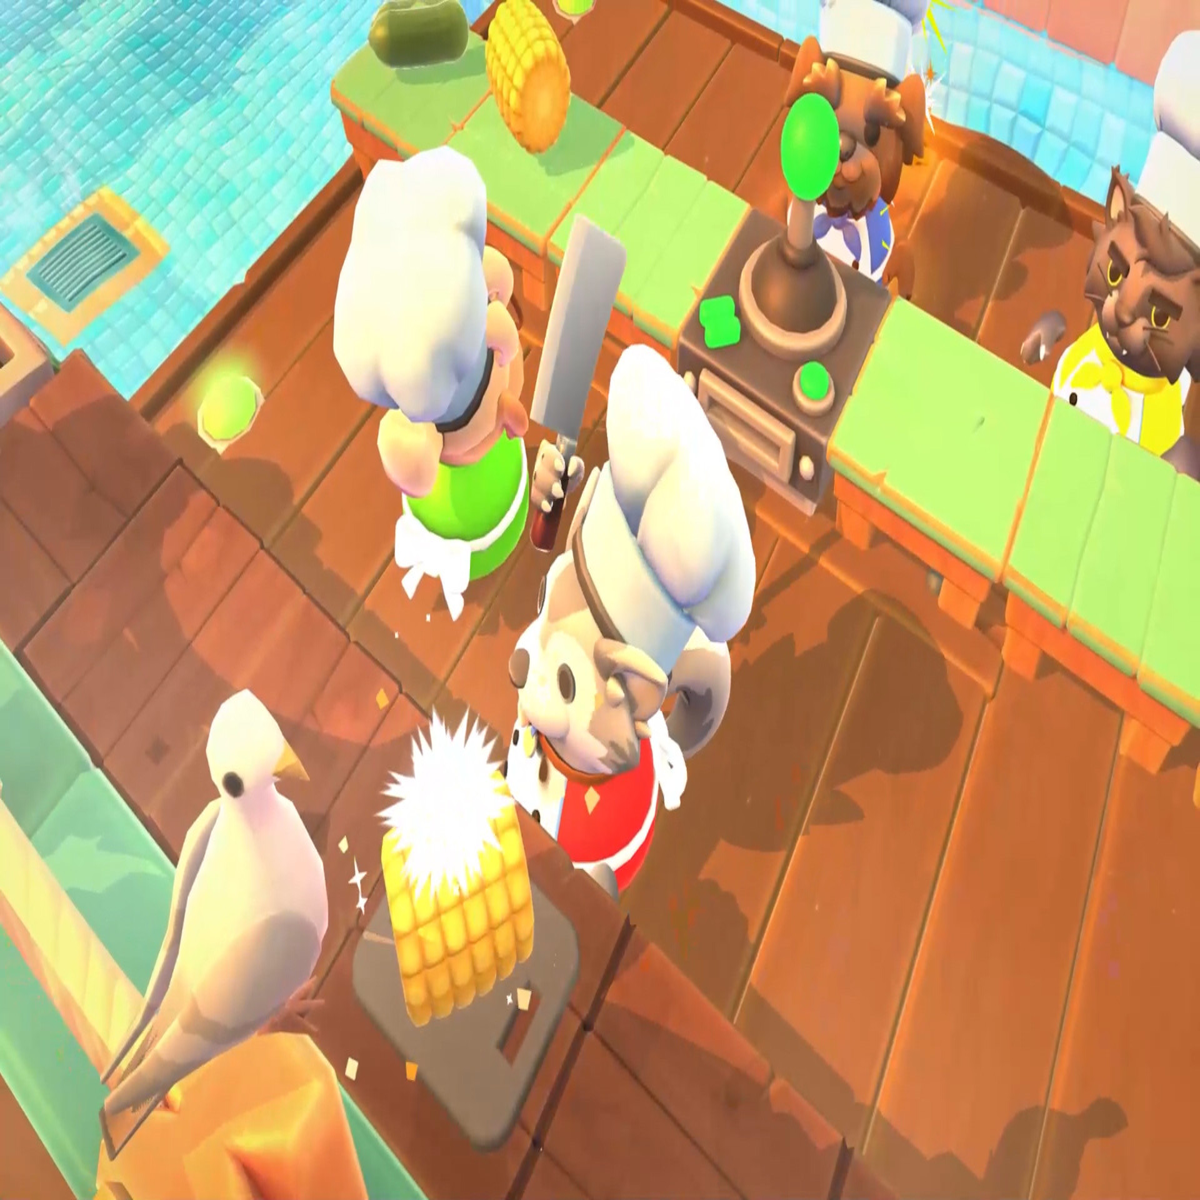 Overcooked is available for free on Epic Games this week - Times